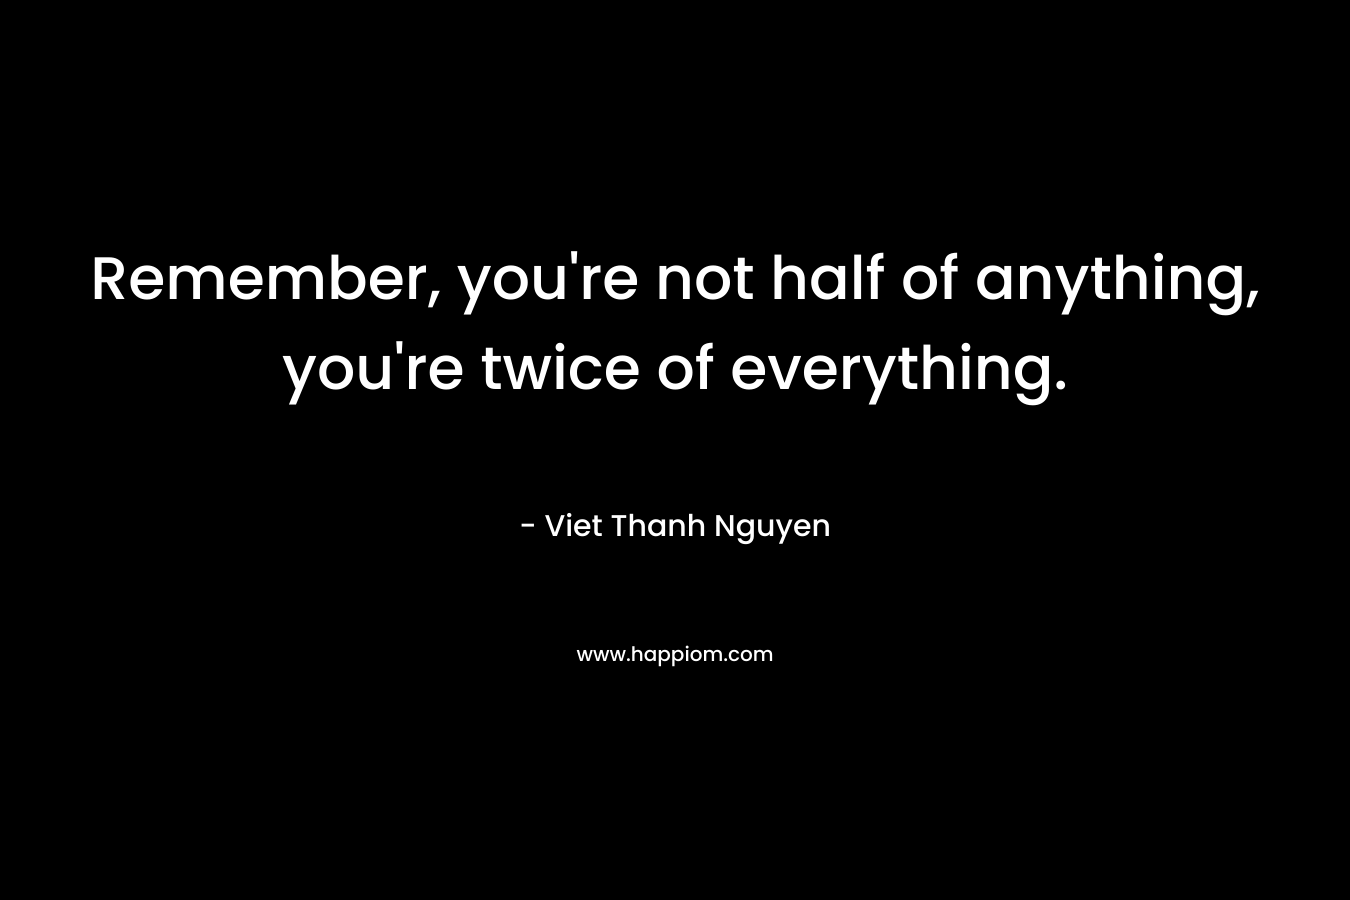 Remember, you’re not half of anything, you’re twice of everything. – Viet Thanh Nguyen